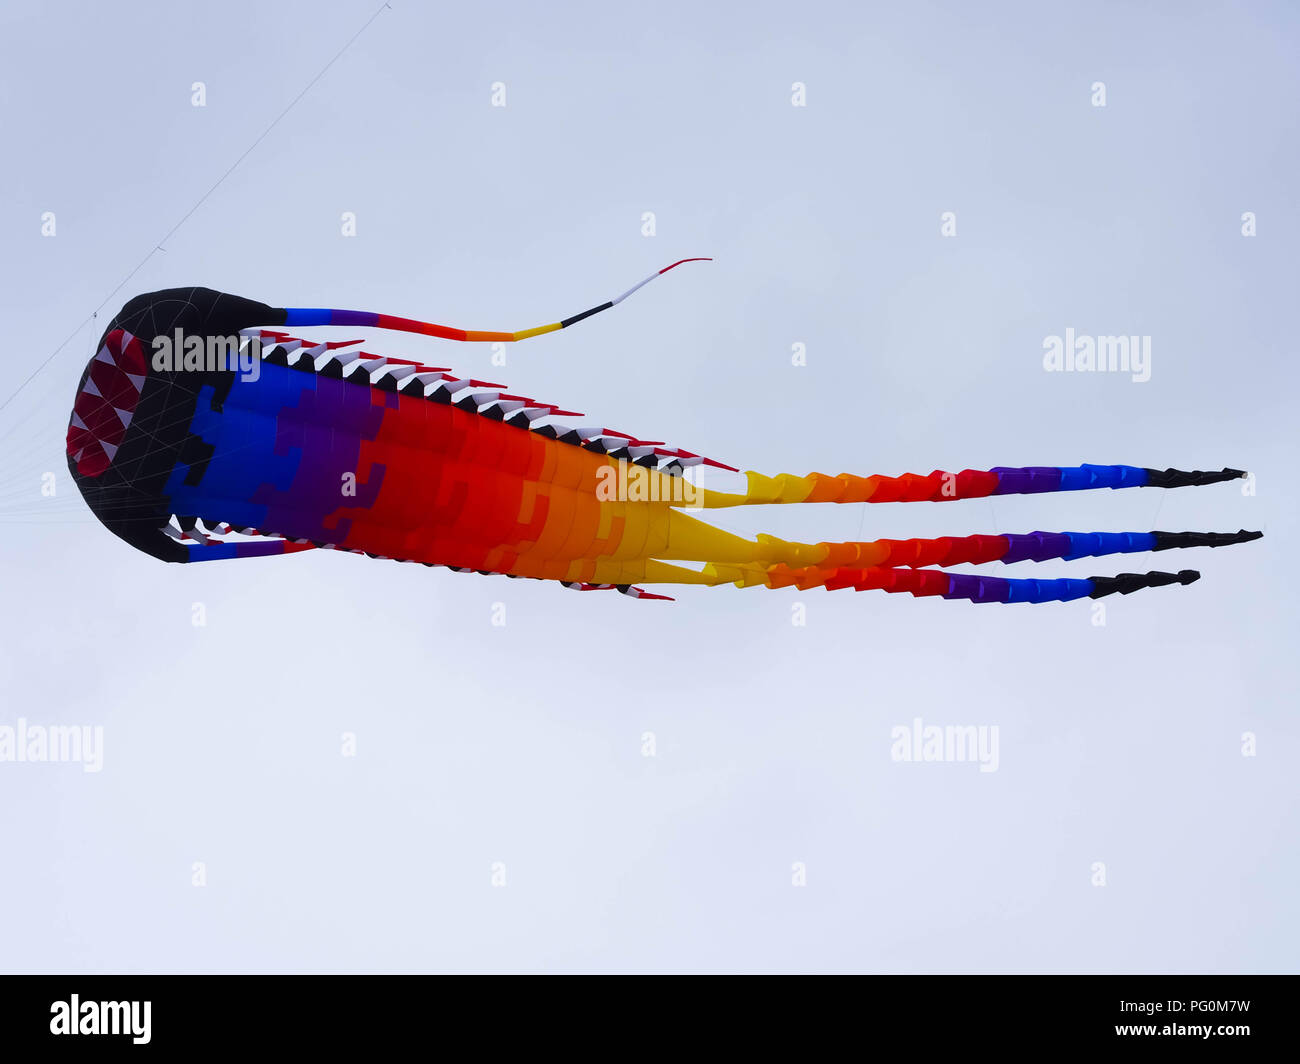 A squid kite flying against a grey cloudy sky Stock Photo